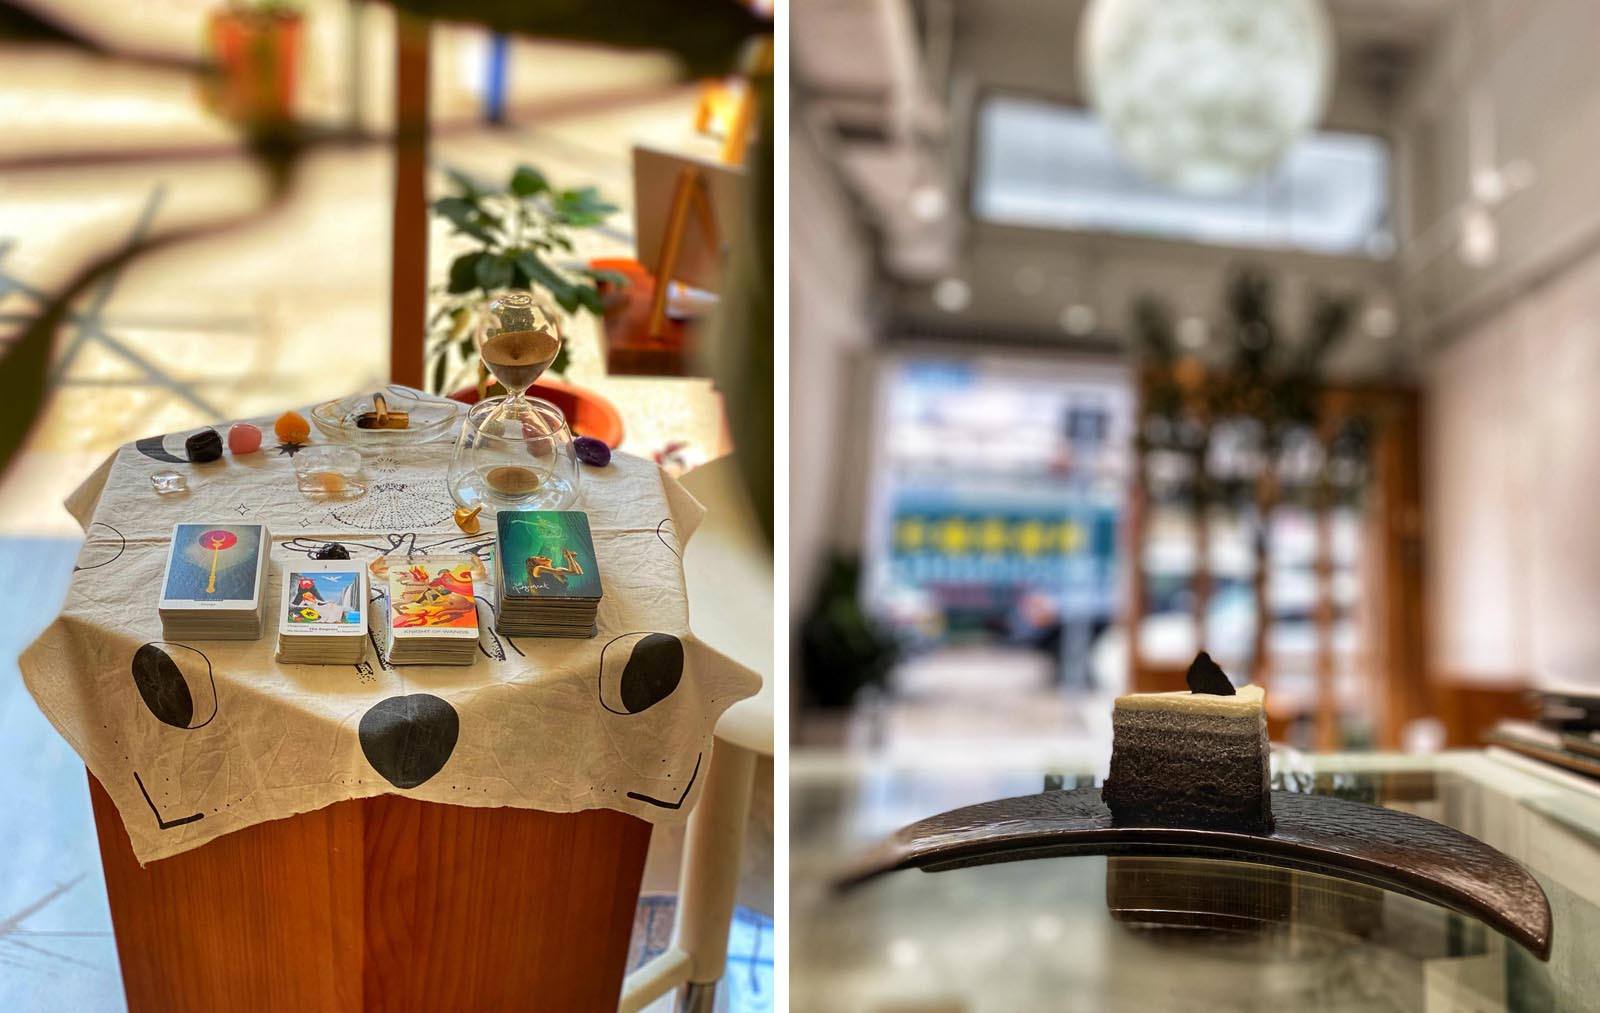 New restaurants in Hong Kong include The Soulroom. Come for coffee and tarot card readings